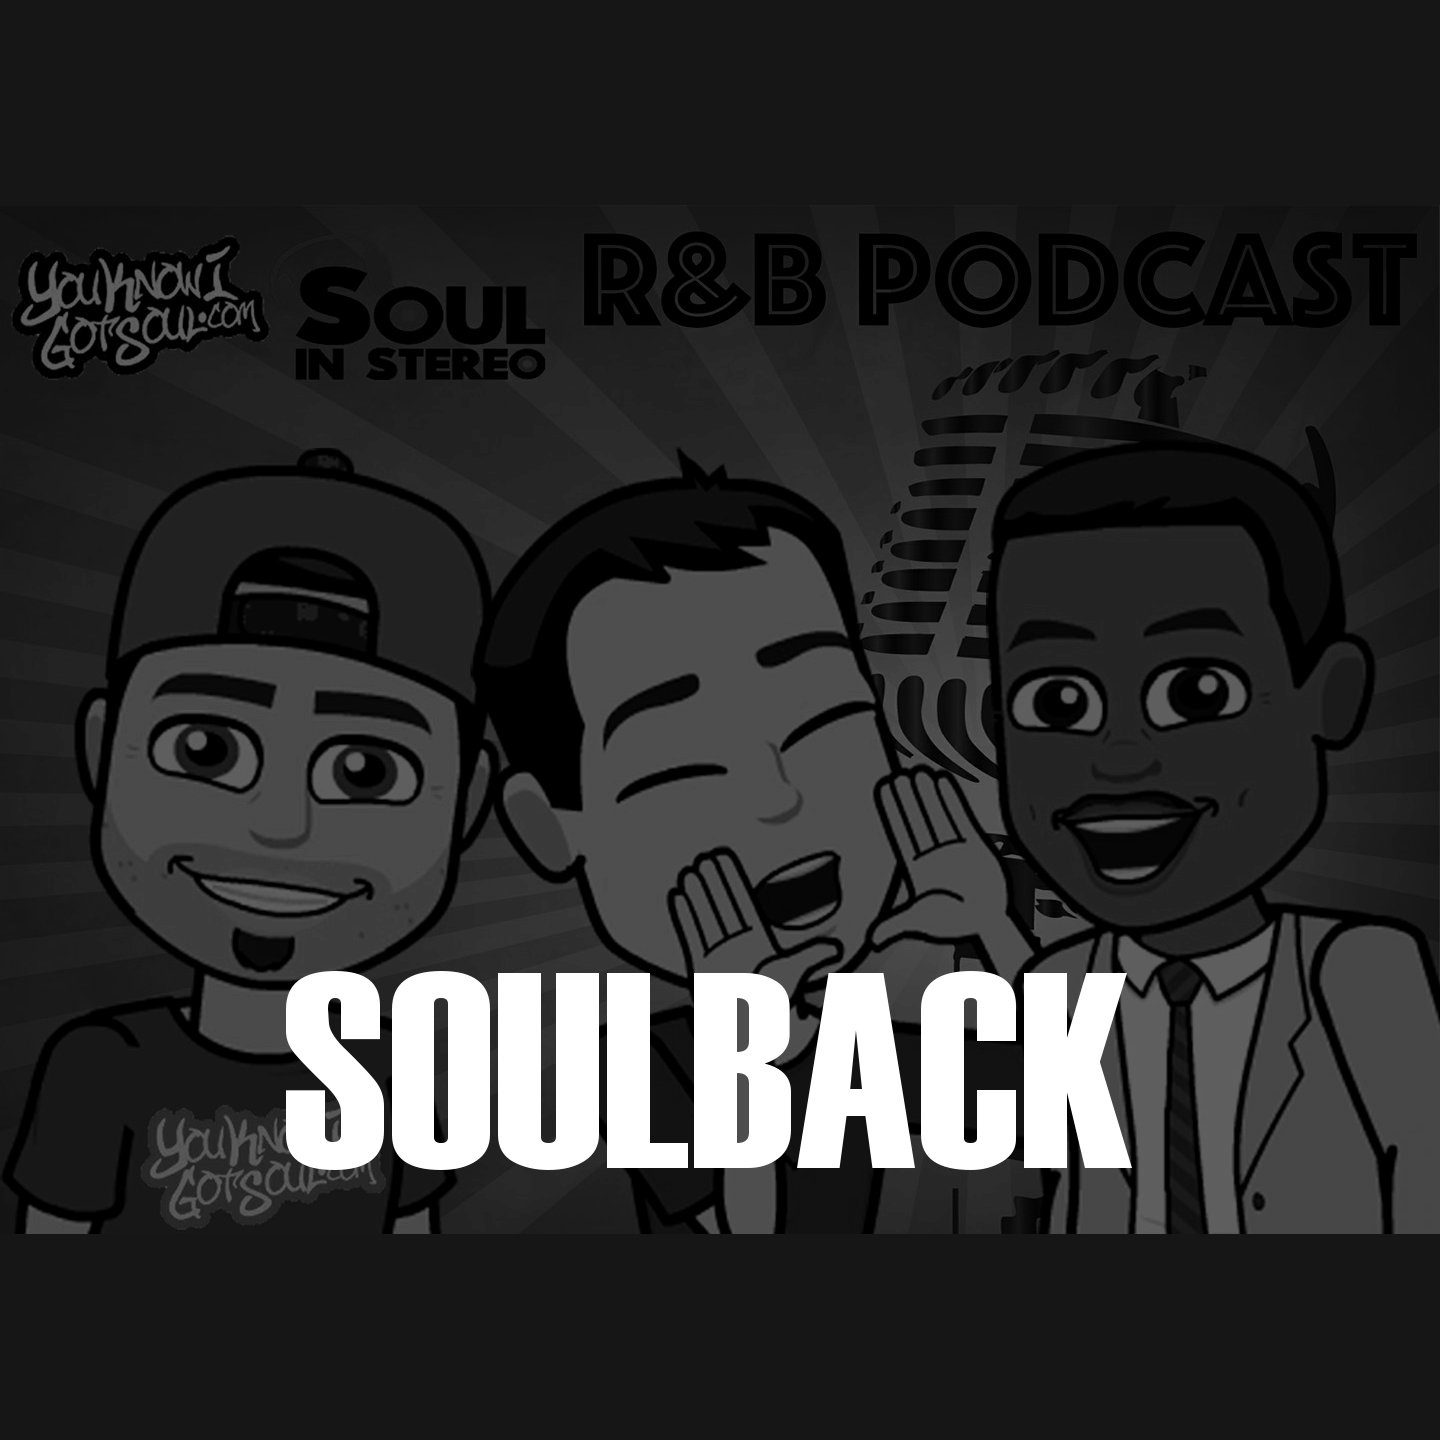 SoulBack (featuring Case) - The R&B Podcast Episode 3